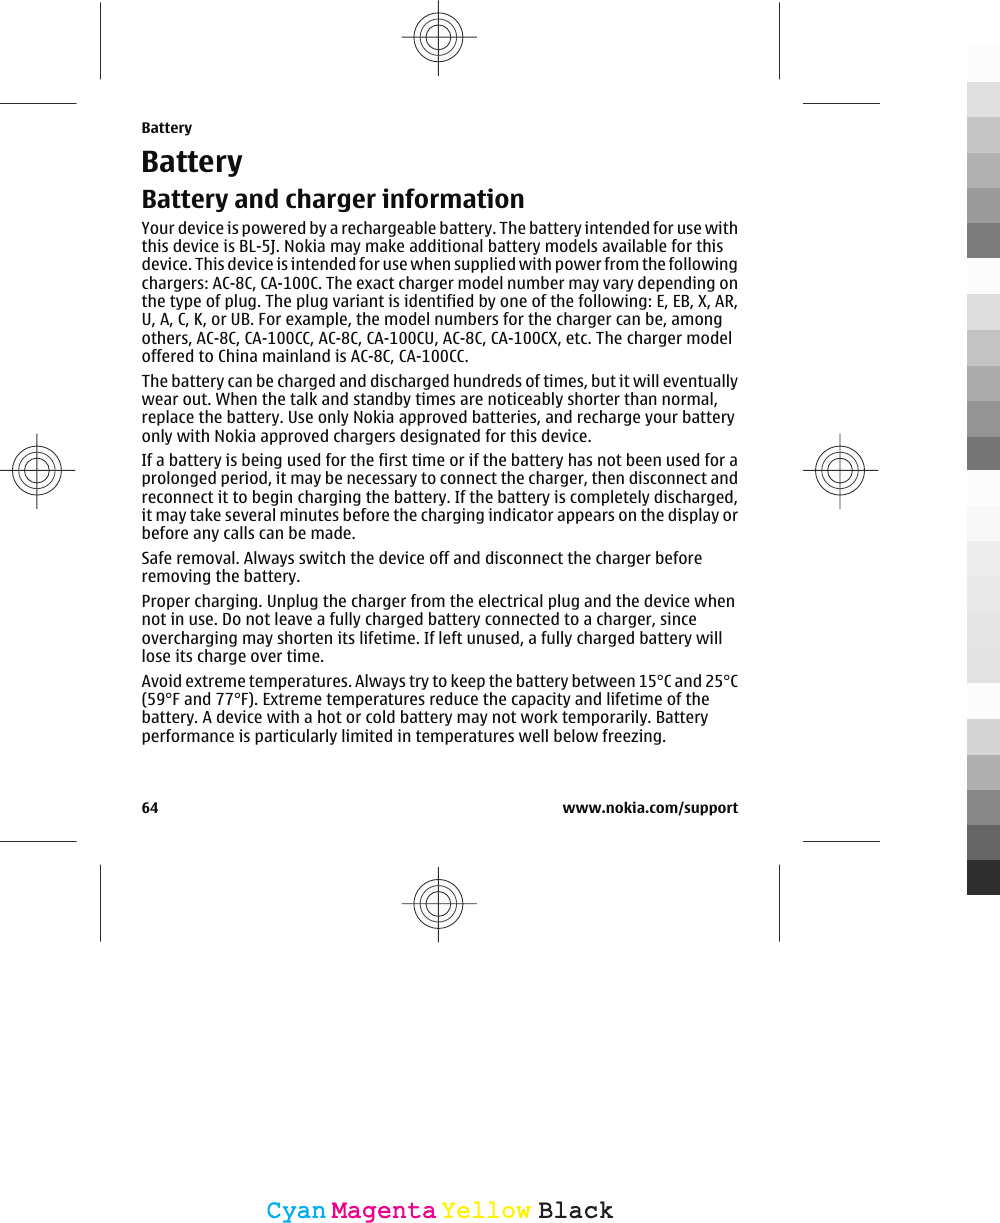 BatteryBattery and charger informationYour device is powered by a rechargeable battery. The battery intended for use withthis device is BL-5J. Nokia may make additional battery models available for thisdevice. This device is intended for use when supplied with power from the followingchargers: AC-8C, CA-100C. The exact charger model number may vary depending onthe type of plug. The plug variant is identified by one of the following: E, EB, X, AR,U, A, C, K, or UB. For example, the model numbers for the charger can be, amongothers, AC-8C, CA-100CC, AC-8C, CA-100CU, AC-8C, CA-100CX, etc. The charger modeloffered to China mainland is AC-8C, CA-100CC.The battery can be charged and discharged hundreds of times, but it will eventuallywear out. When the talk and standby times are noticeably shorter than normal,replace the battery. Use only Nokia approved batteries, and recharge your batteryonly with Nokia approved chargers designated for this device.If a battery is being used for the first time or if the battery has not been used for aprolonged period, it may be necessary to connect the charger, then disconnect andreconnect it to begin charging the battery. If the battery is completely discharged,it may take several minutes before the charging indicator appears on the display orbefore any calls can be made.Safe removal. Always switch the device off and disconnect the charger beforeremoving the battery.Proper charging. Unplug the charger from the electrical plug and the device whennot in use. Do not leave a fully charged battery connected to a charger, sinceovercharging may shorten its lifetime. If left unused, a fully charged battery willlose its charge over time.Avoid extreme temperatures. Always try to keep the battery between 15°C and 25°C(59°F and 77°F). Extreme temperatures reduce the capacity and lifetime of thebattery. A device with a hot or cold battery may not work temporarily. Batteryperformance is particularly limited in temperatures well below freezing.Battery64 www.nokia.com/supportCyanCyanMagentaMagentaYellowYellowBlackBlack